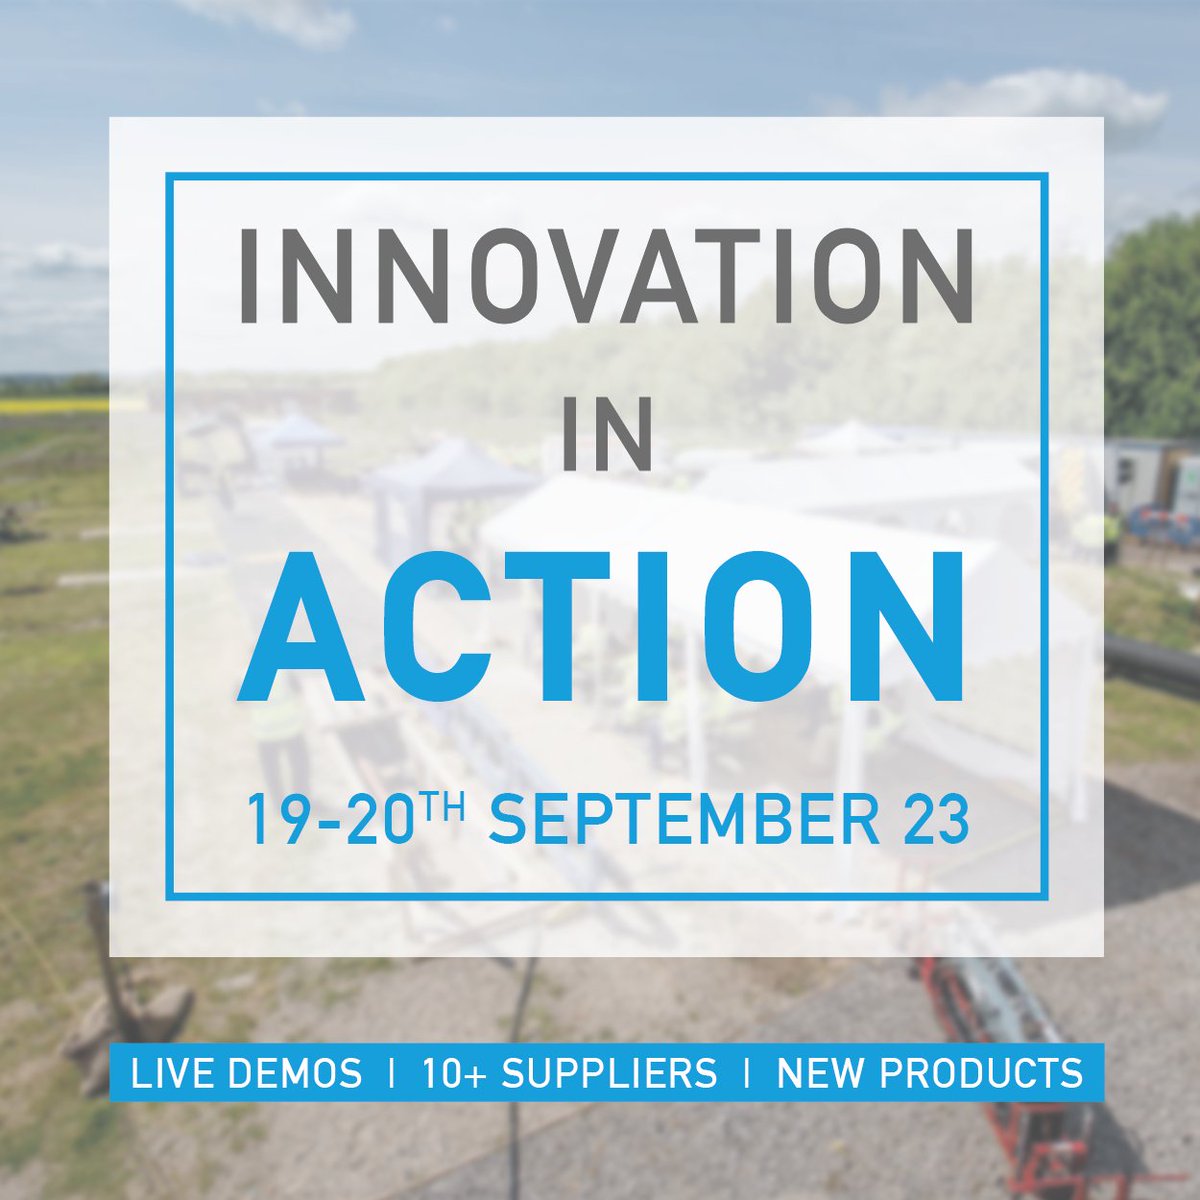 HURRY! Our limited spaces are filling up for our Innovation In Action event! Don't miss this opportunity to see live demonstrations from as well as the chance to network with industry experts. Find out more at: eventbrite.co.uk/e/innovation-i… #innovationinaction #utilitiesindustry